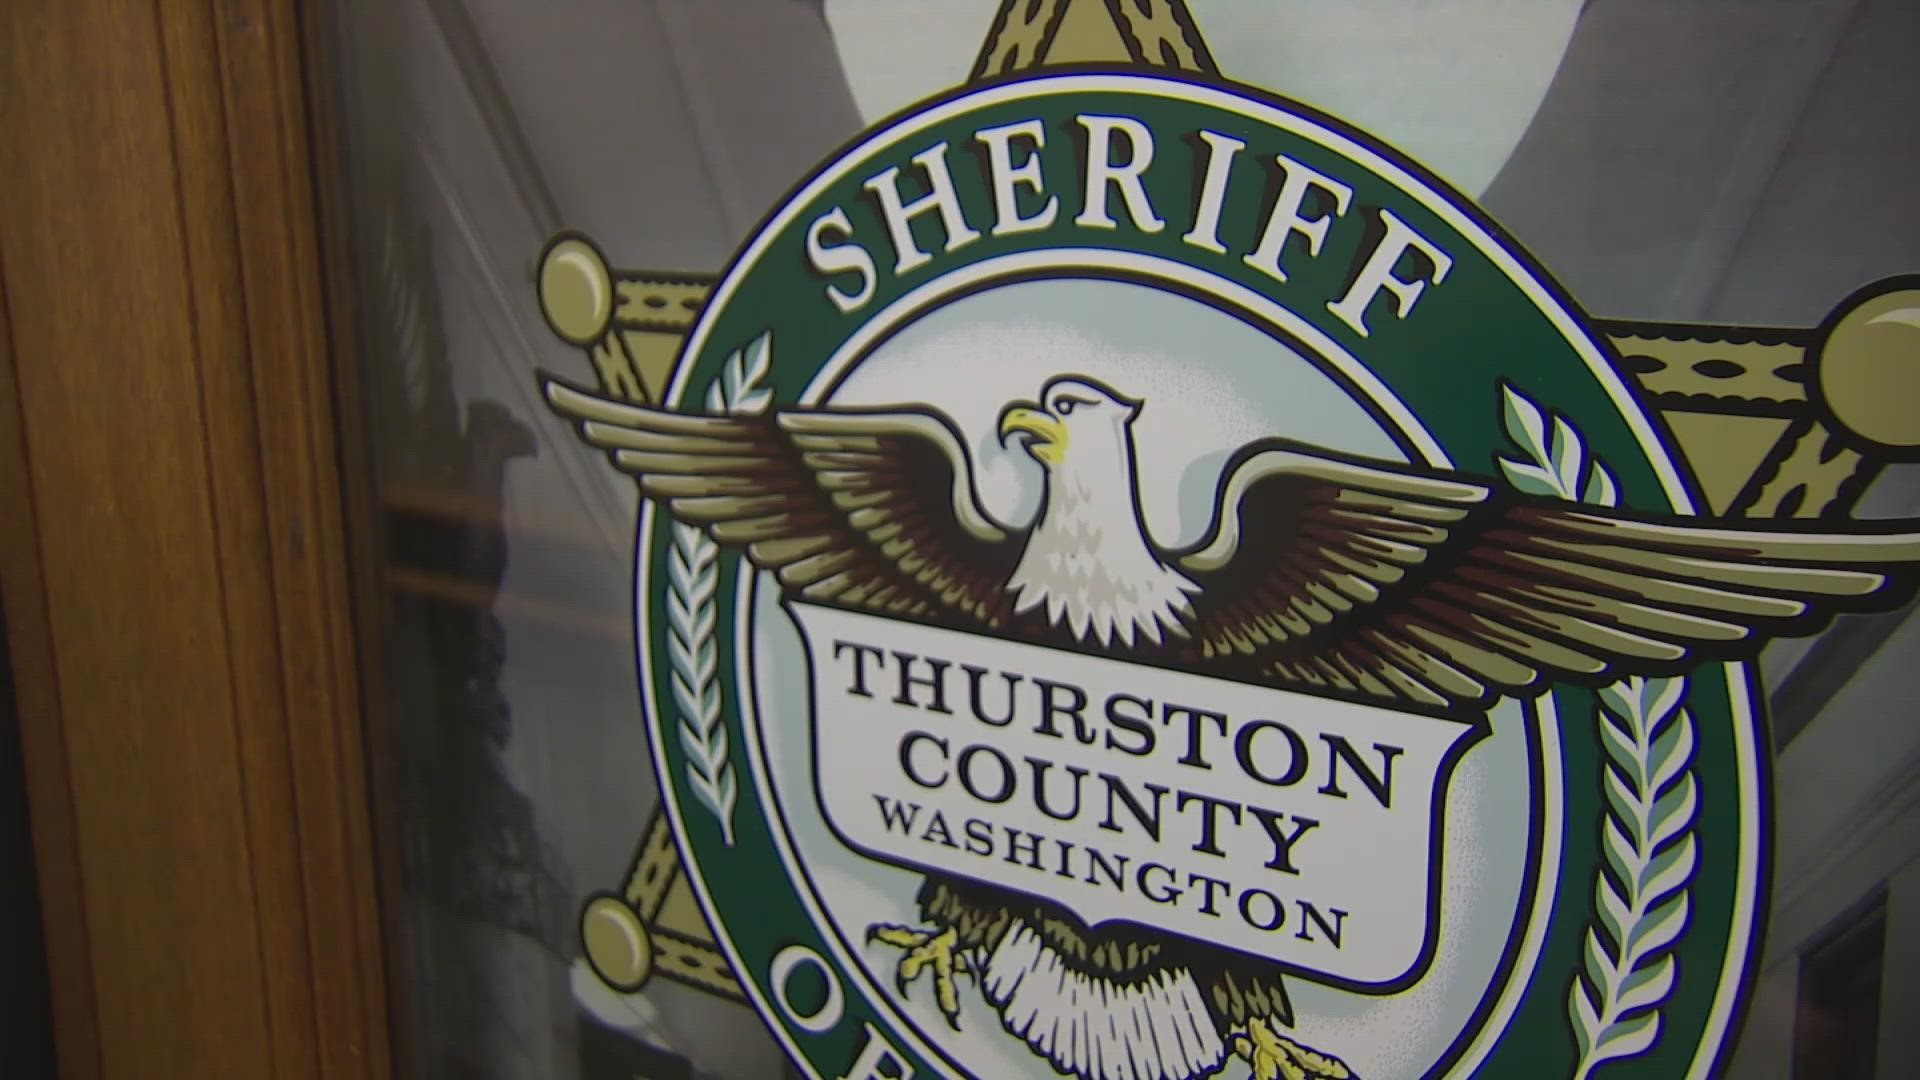 The Thurston County Sheriff’s Office currently has 21 unsolved missing or murdered persons cases on its books. Now some residents are reaching out to help.